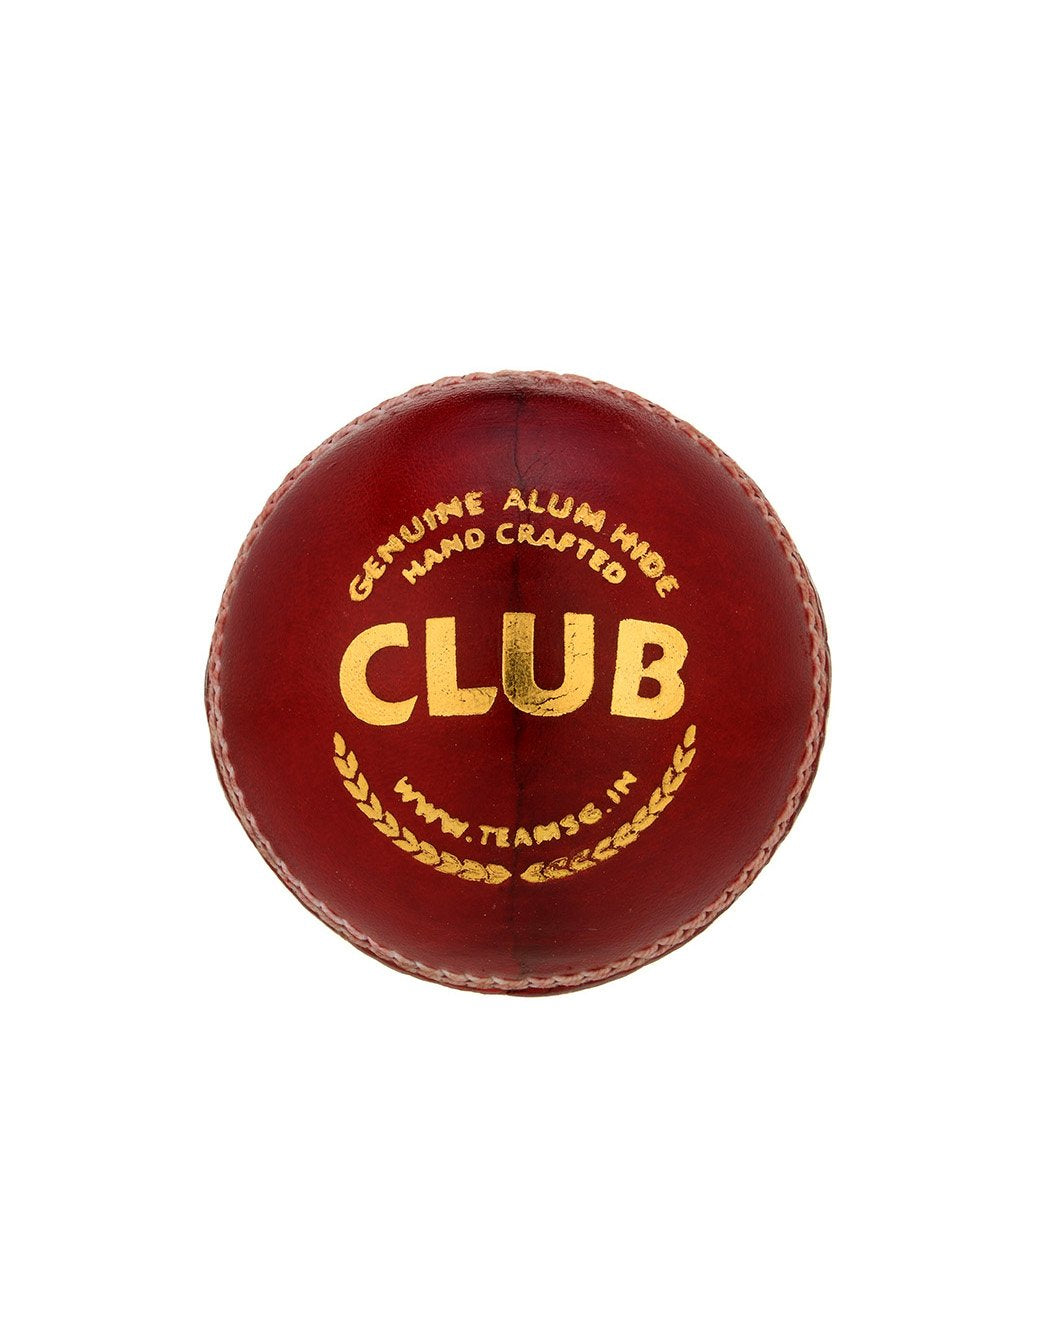 SG Club - Red Cricket Leather Ball